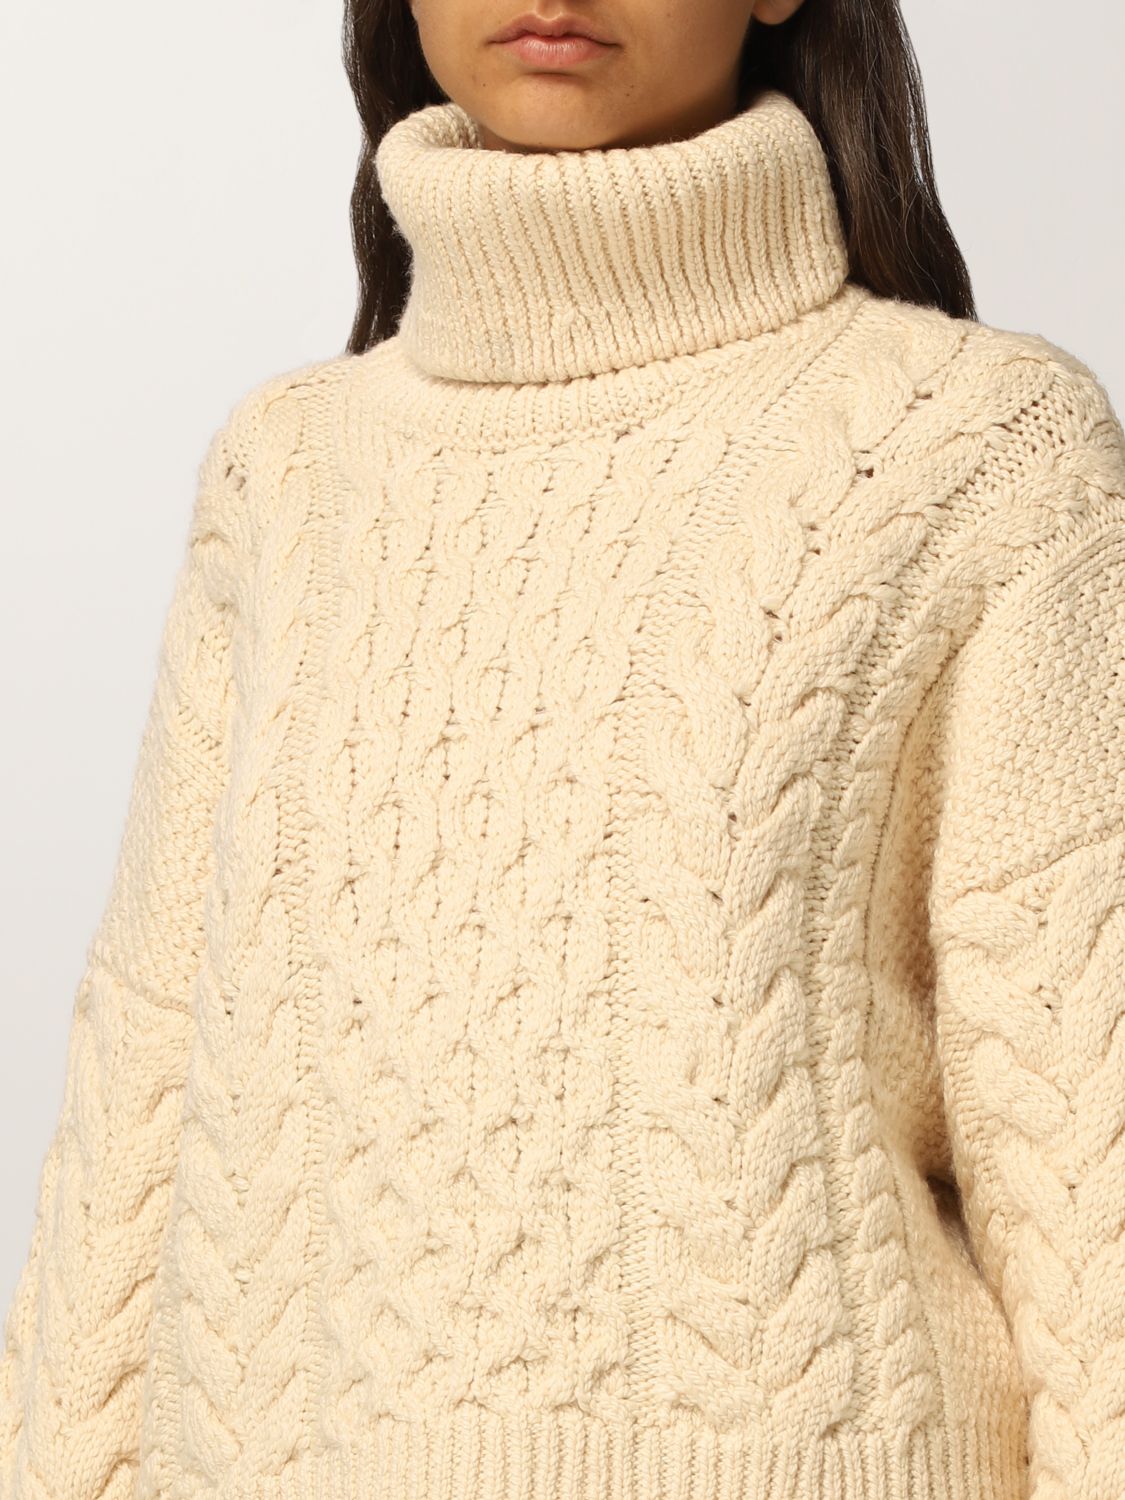 ISABEL ETOILE: sweater cable-knit wool blend | Sweater Isabel Marant Etoile Women Beige | Sweater Isabel Marant PU167321A056E GIGLIO.COM